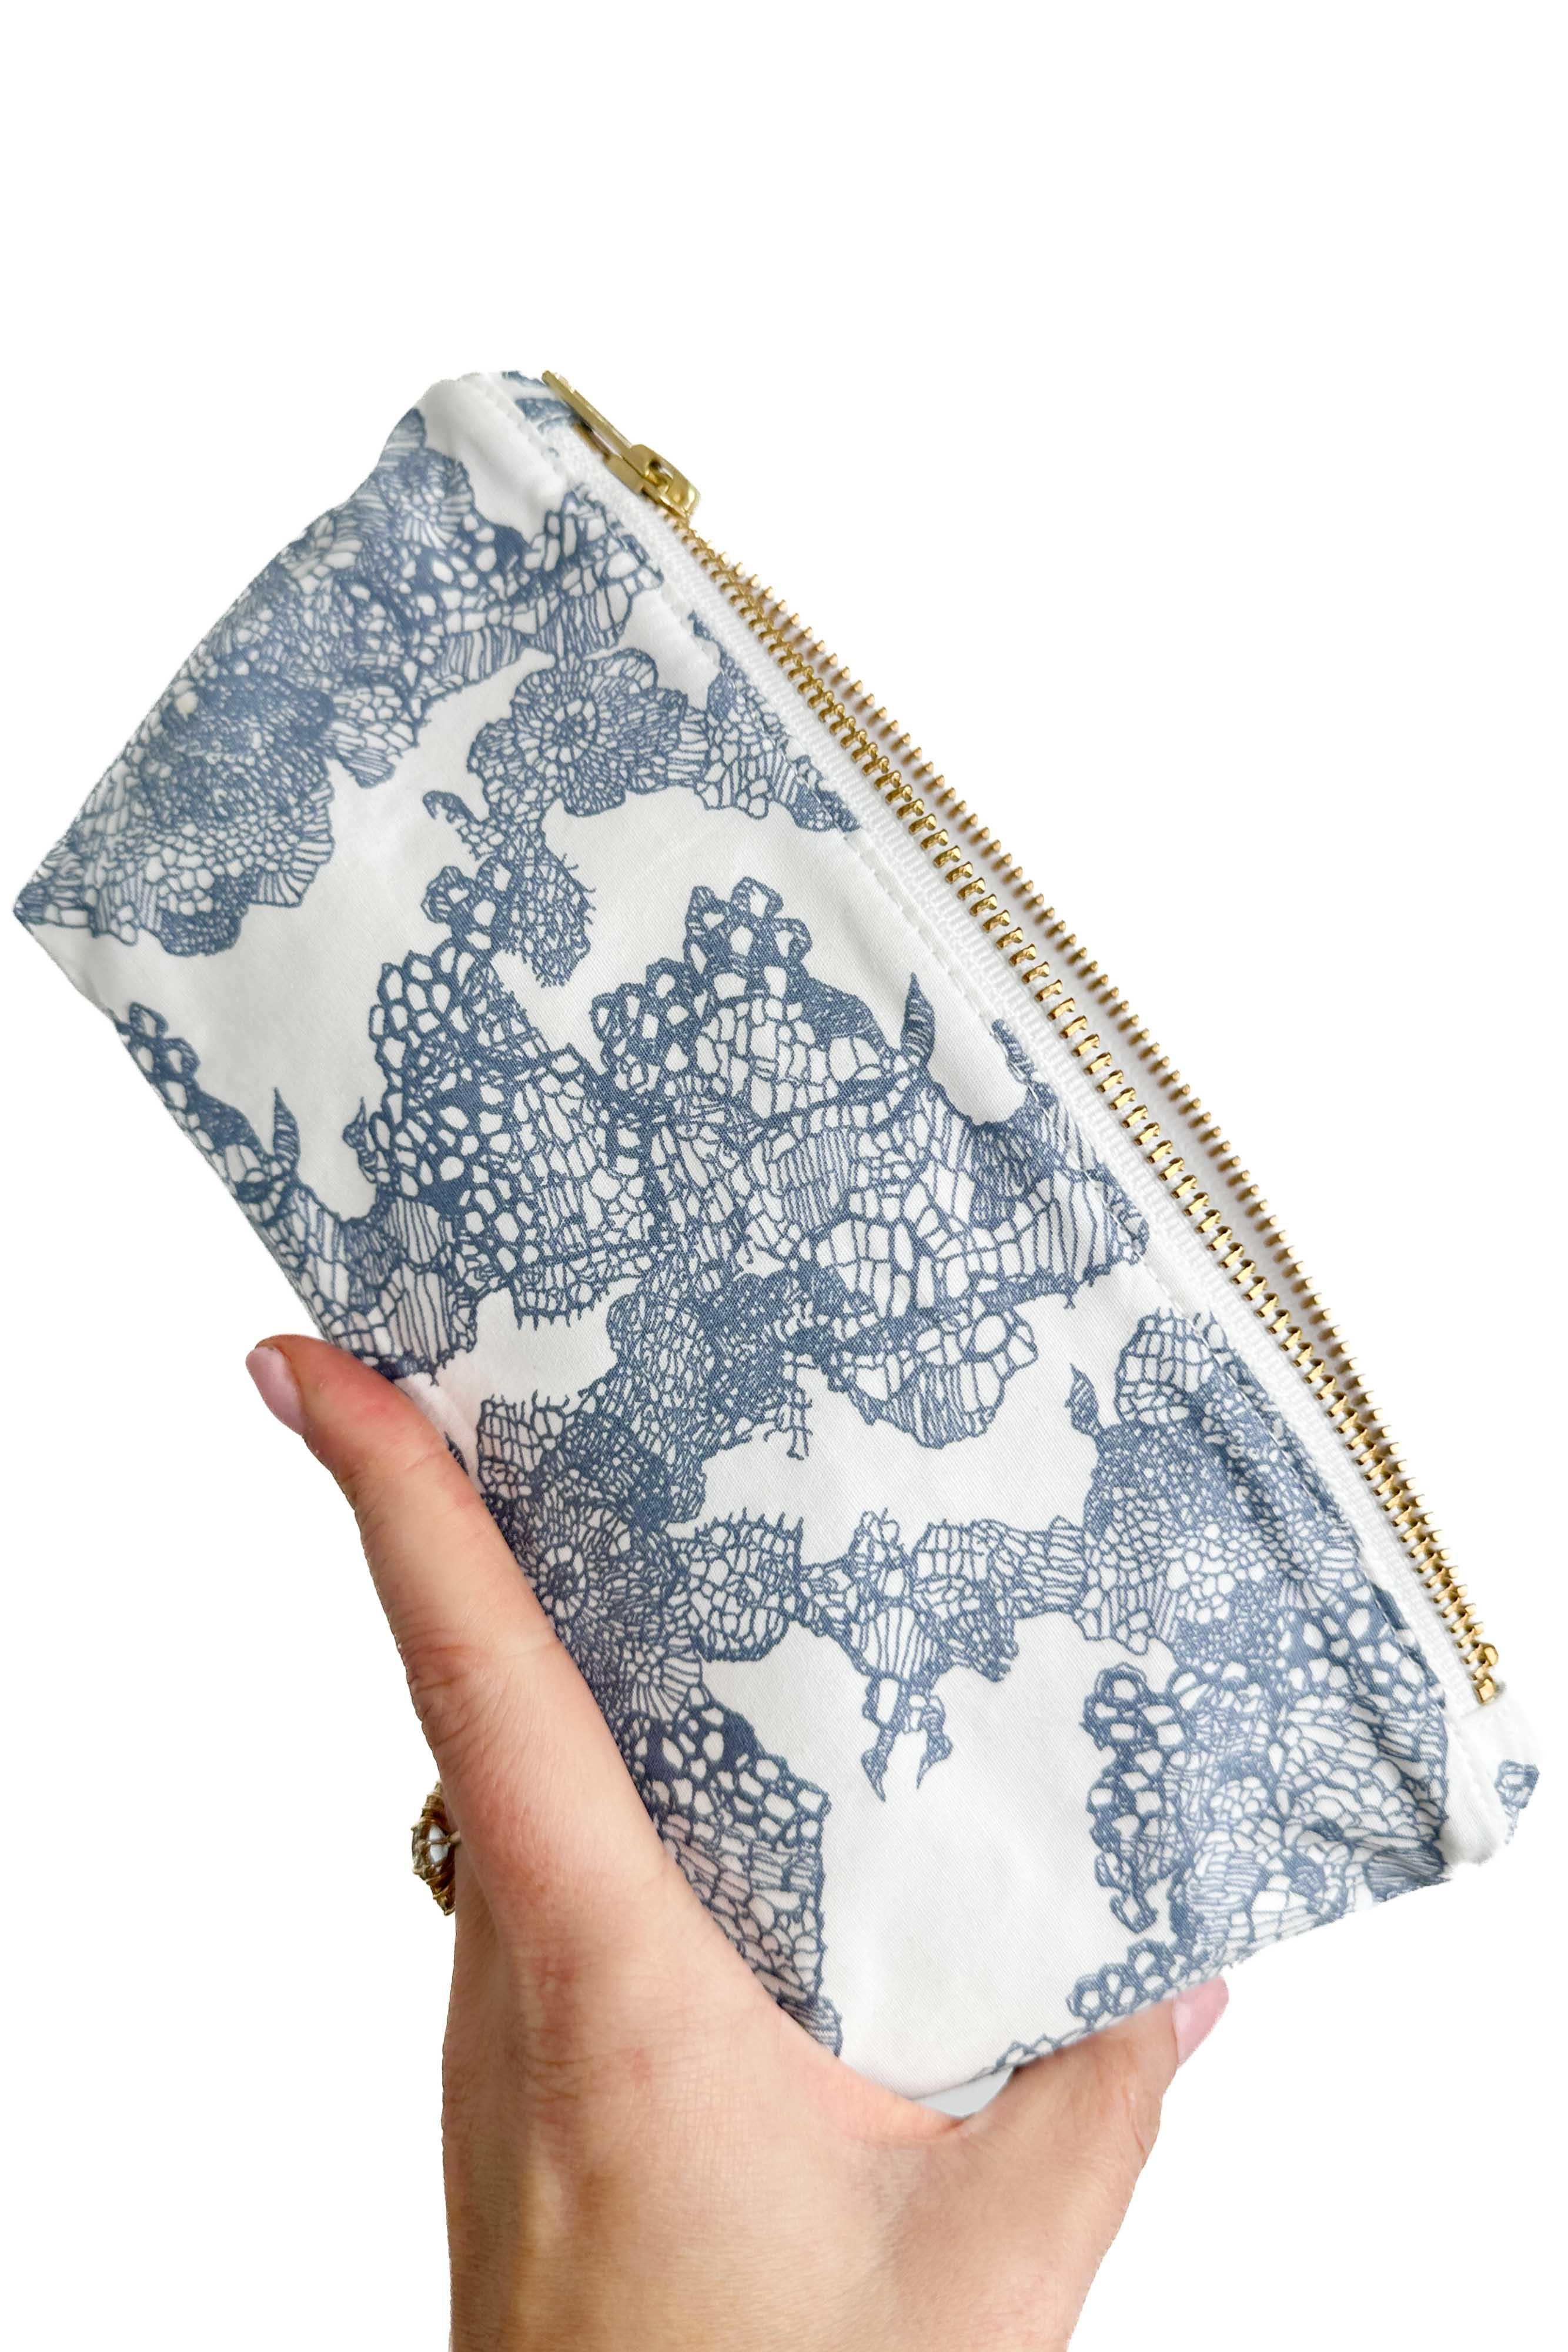 Lace Stash Travel Bag with Compartments READY TO SHIP - Modern Makerie